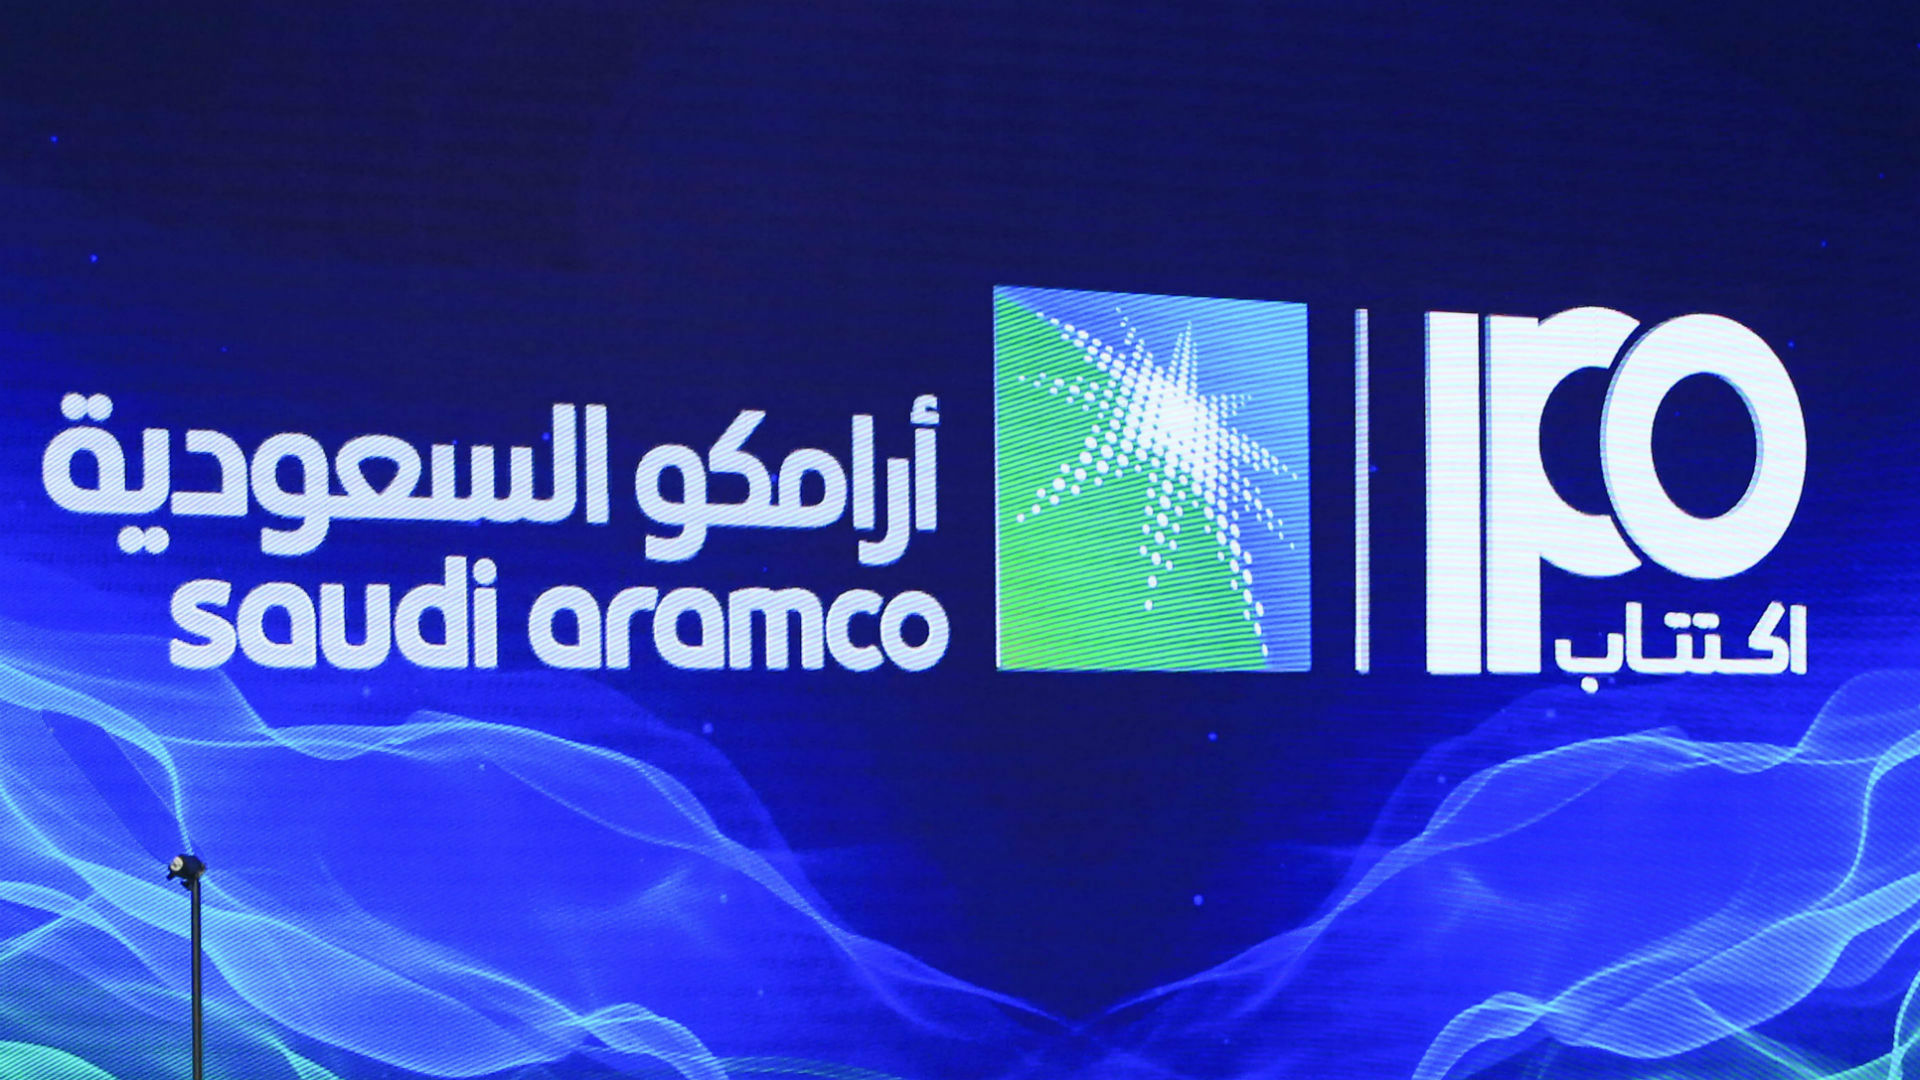 aramco on Twitter Ithra came to life after a global competition between  renowned architects to create a worldclass design inspired by our core  business and spreads the power of RealEnergy in our